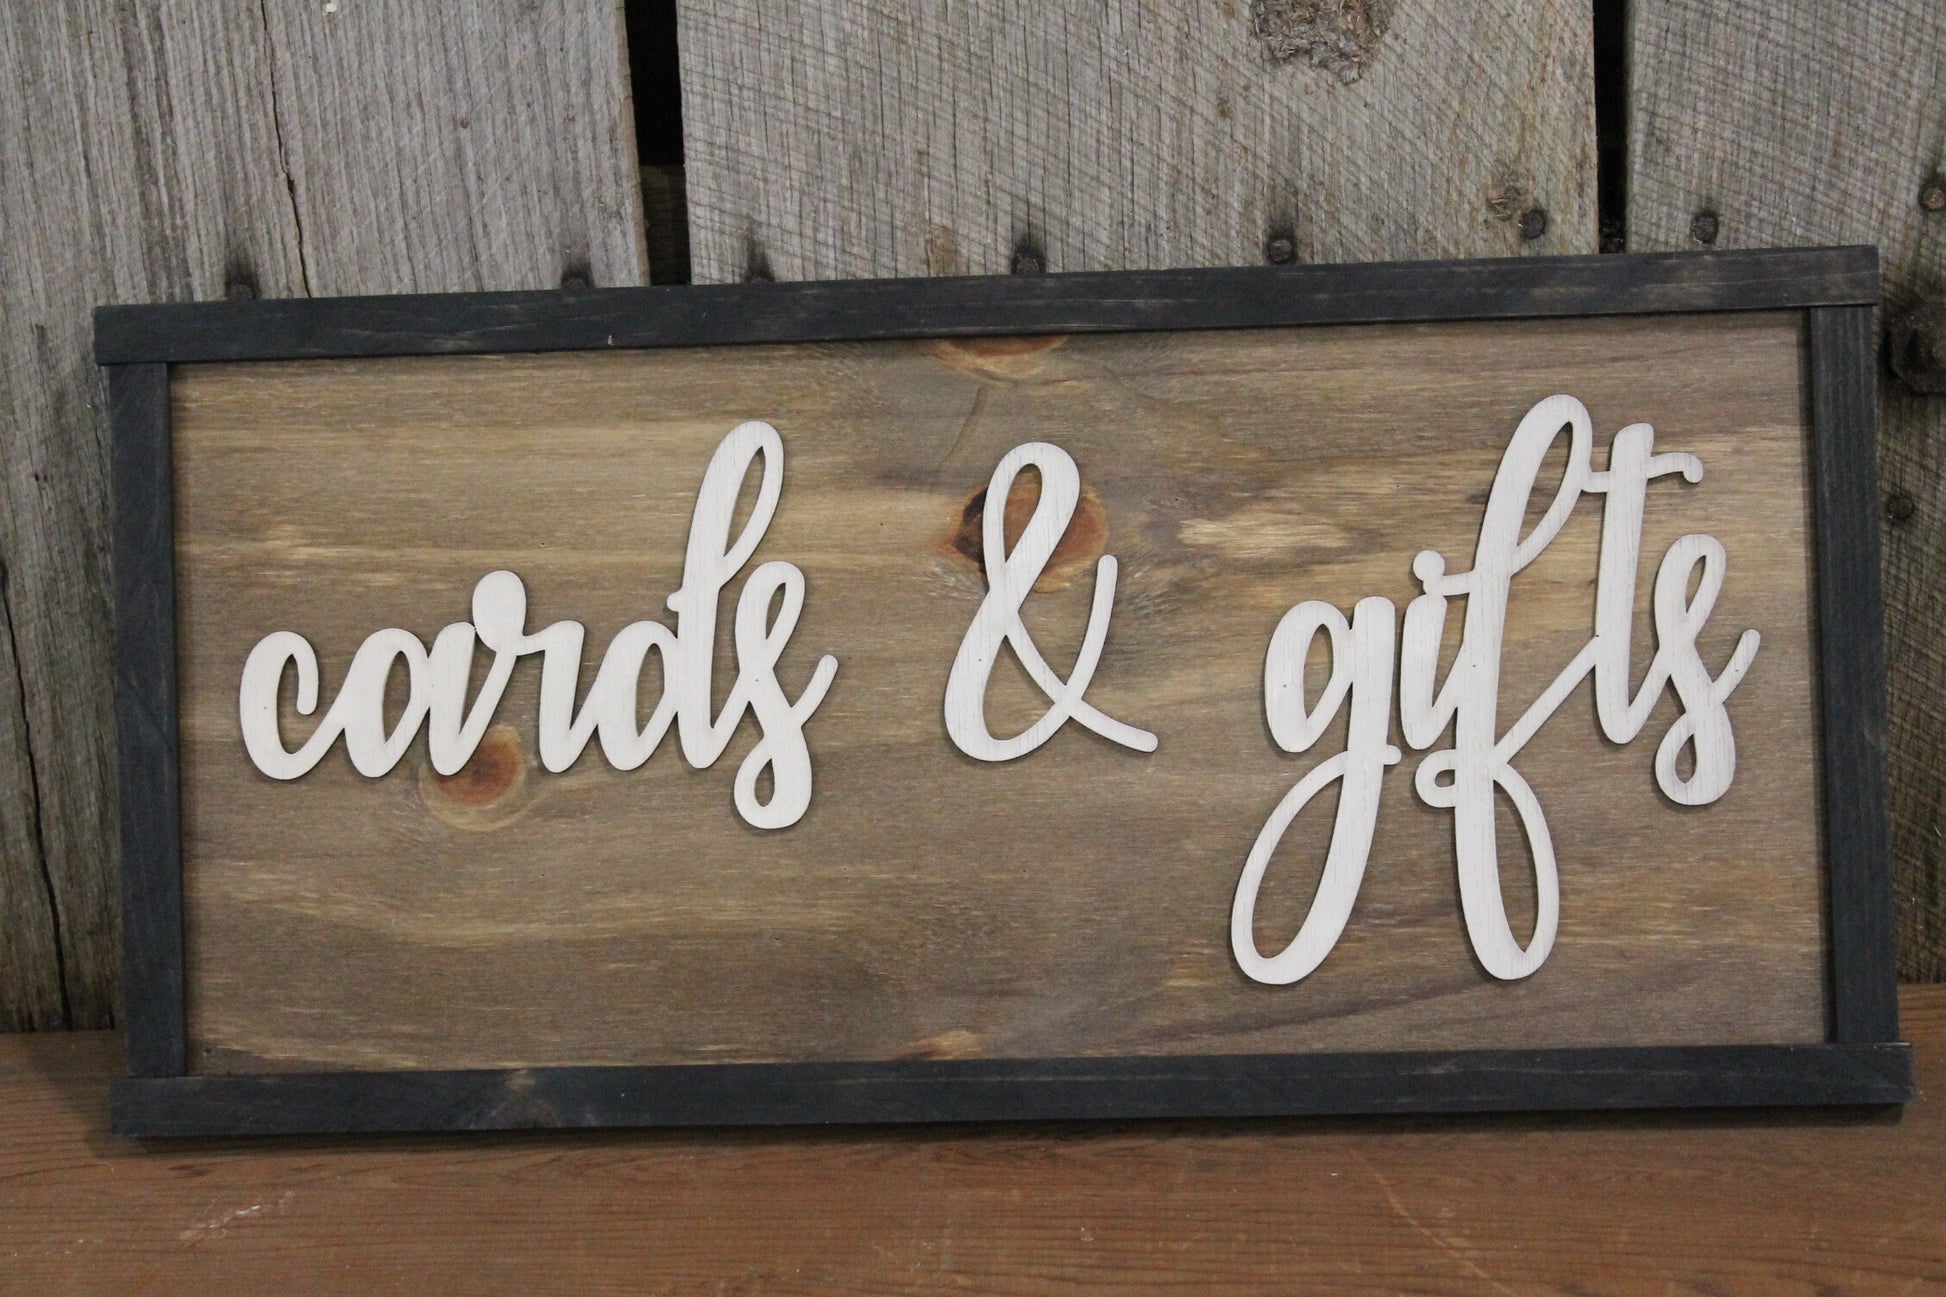 Cards & Gifts Sign Raised Text Wedding Party Graduation Party Shower Extra Large Framed Rustic Primitive Barn Wood Country Signage